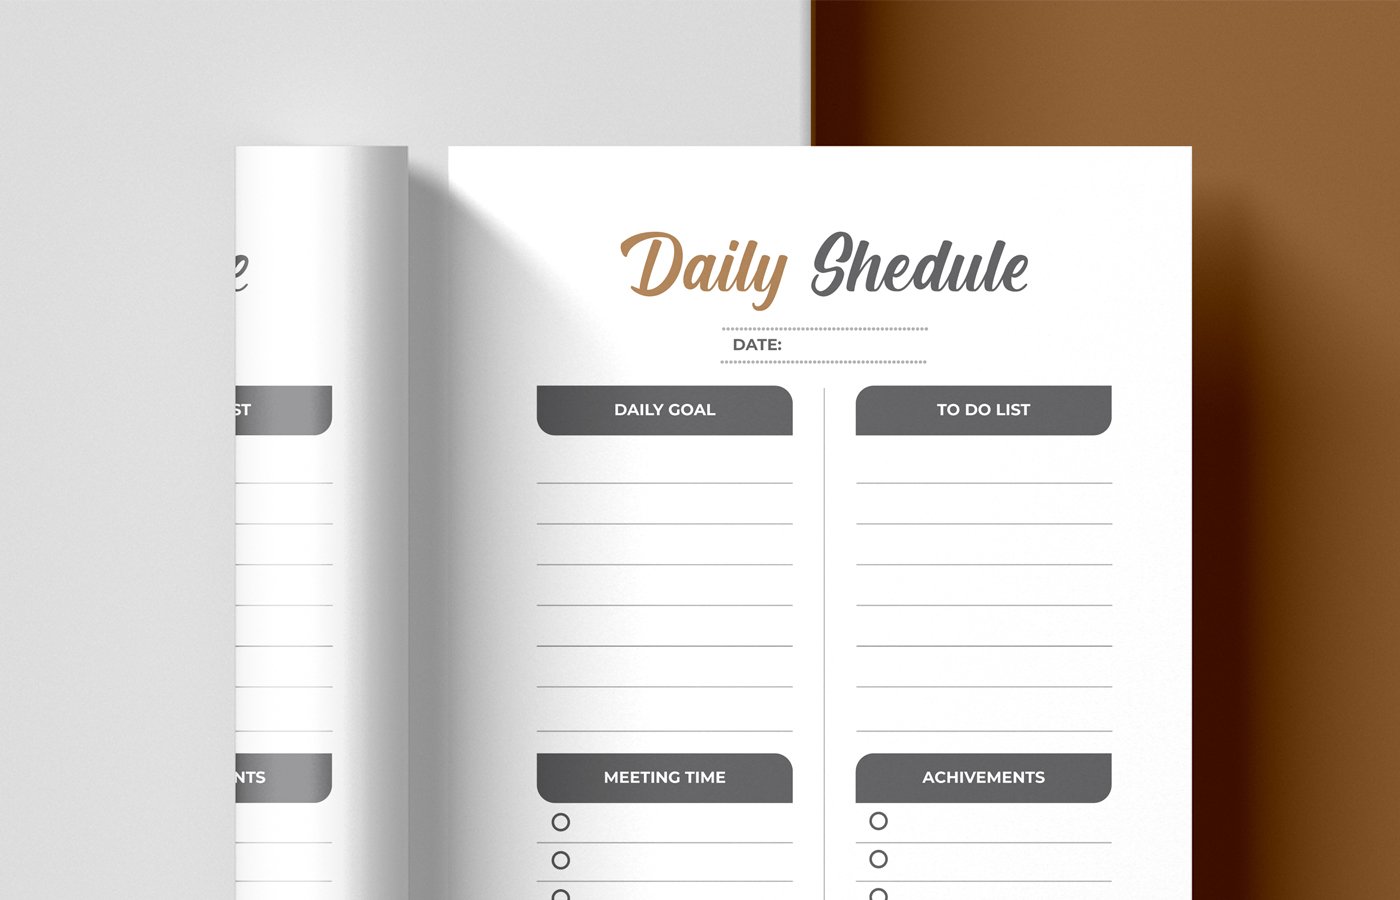 Daily Schedule Template Tayout